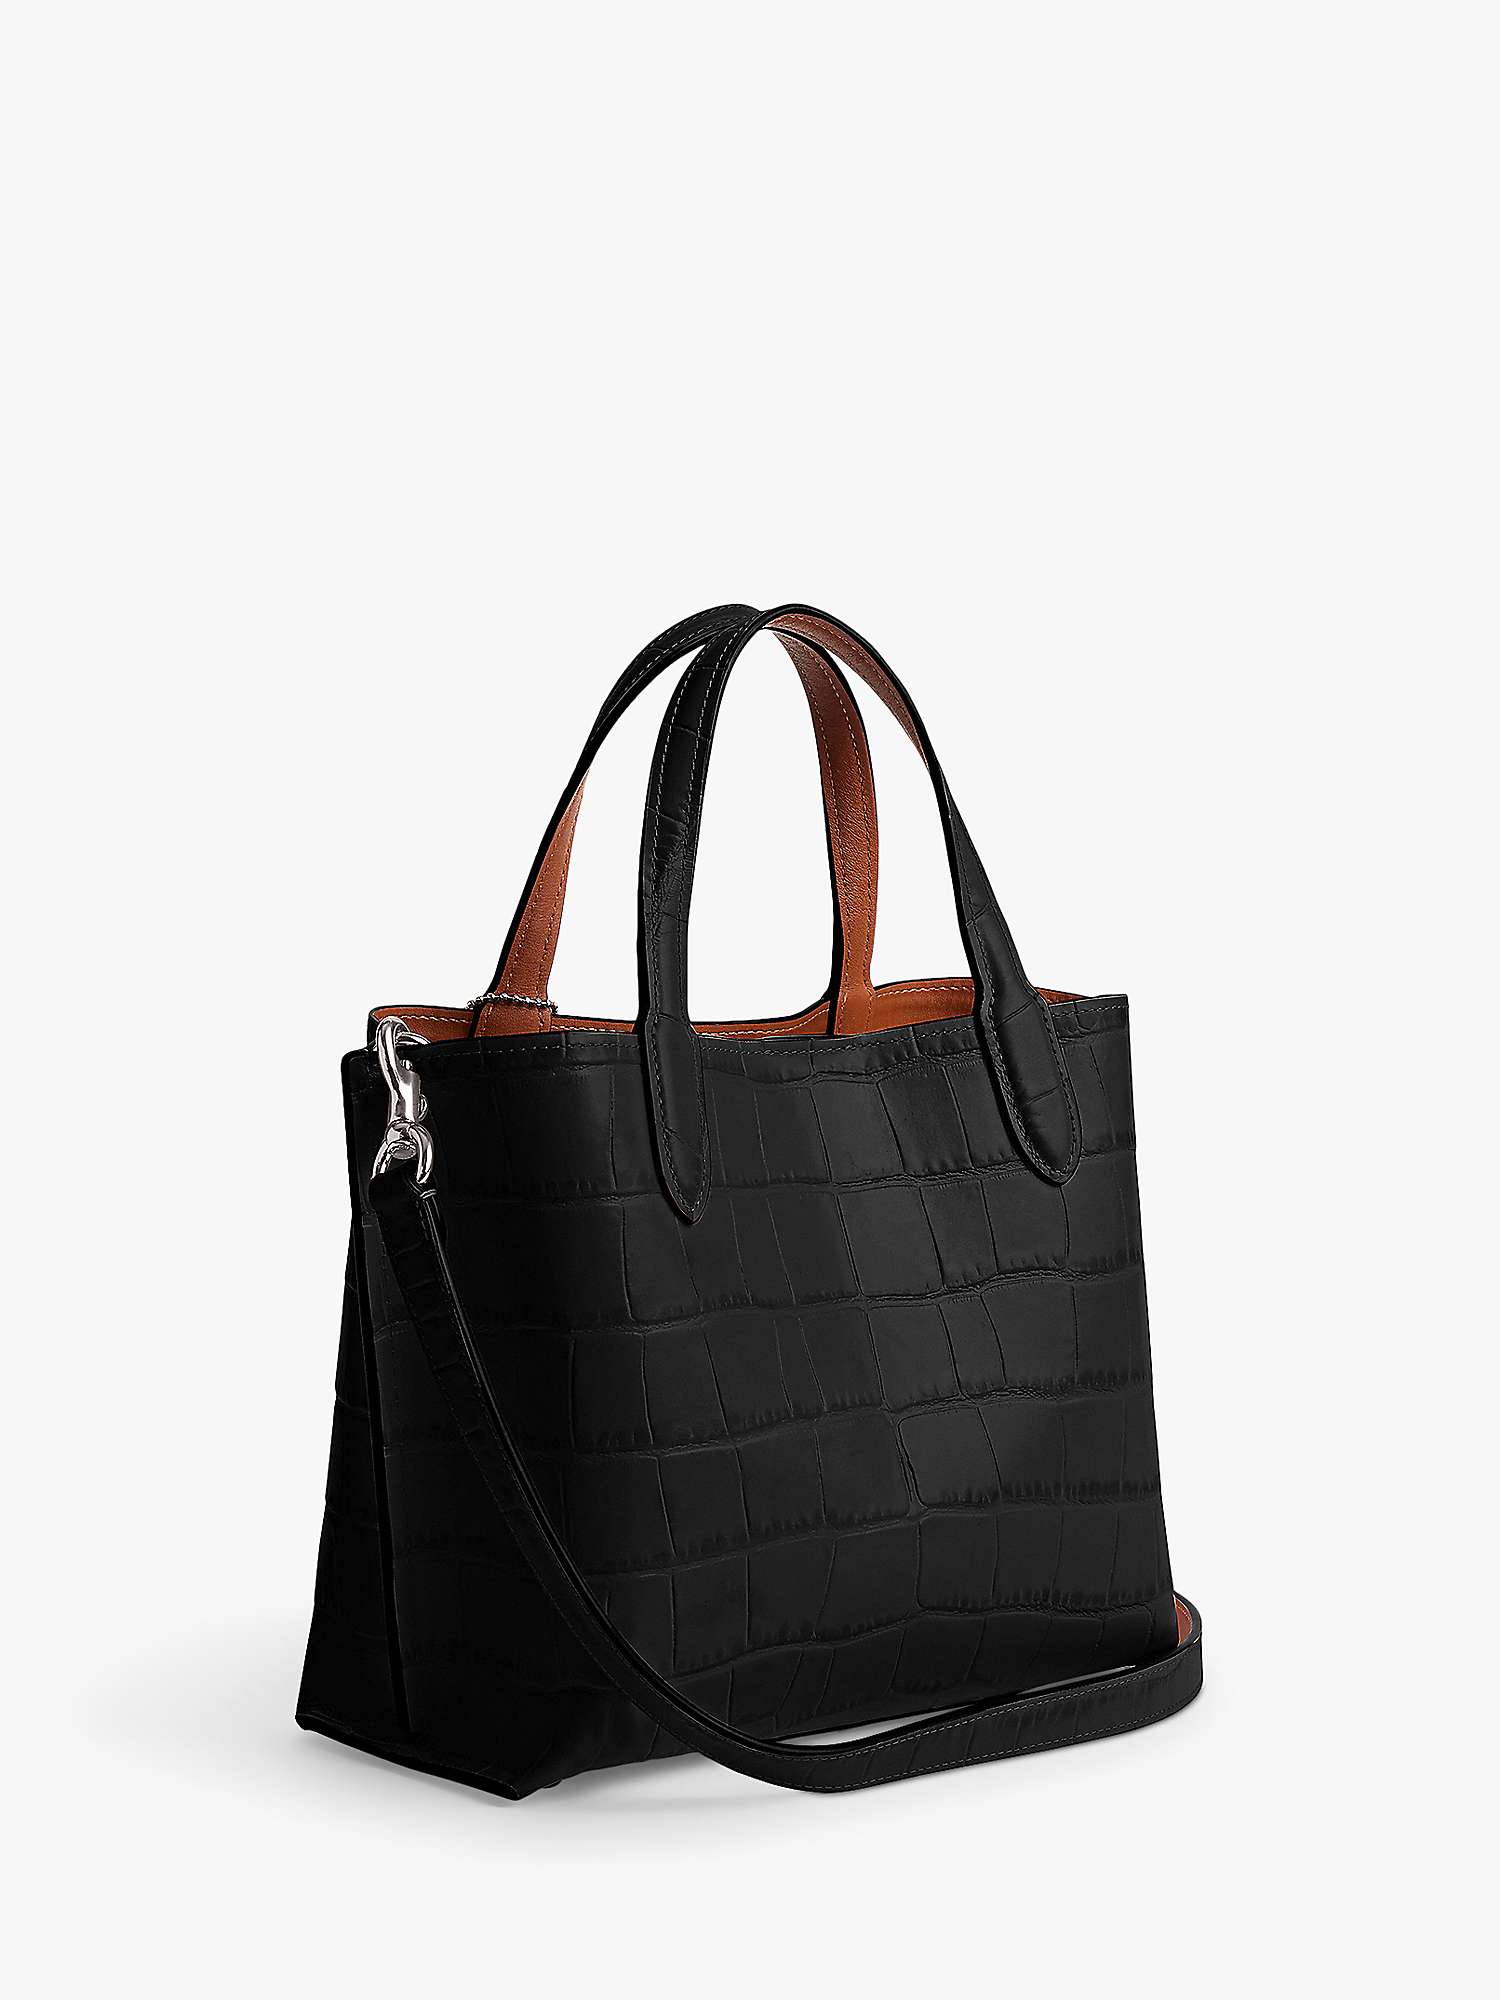 Buy Coach Willow 24 Leather Tote Bag Online at johnlewis.com